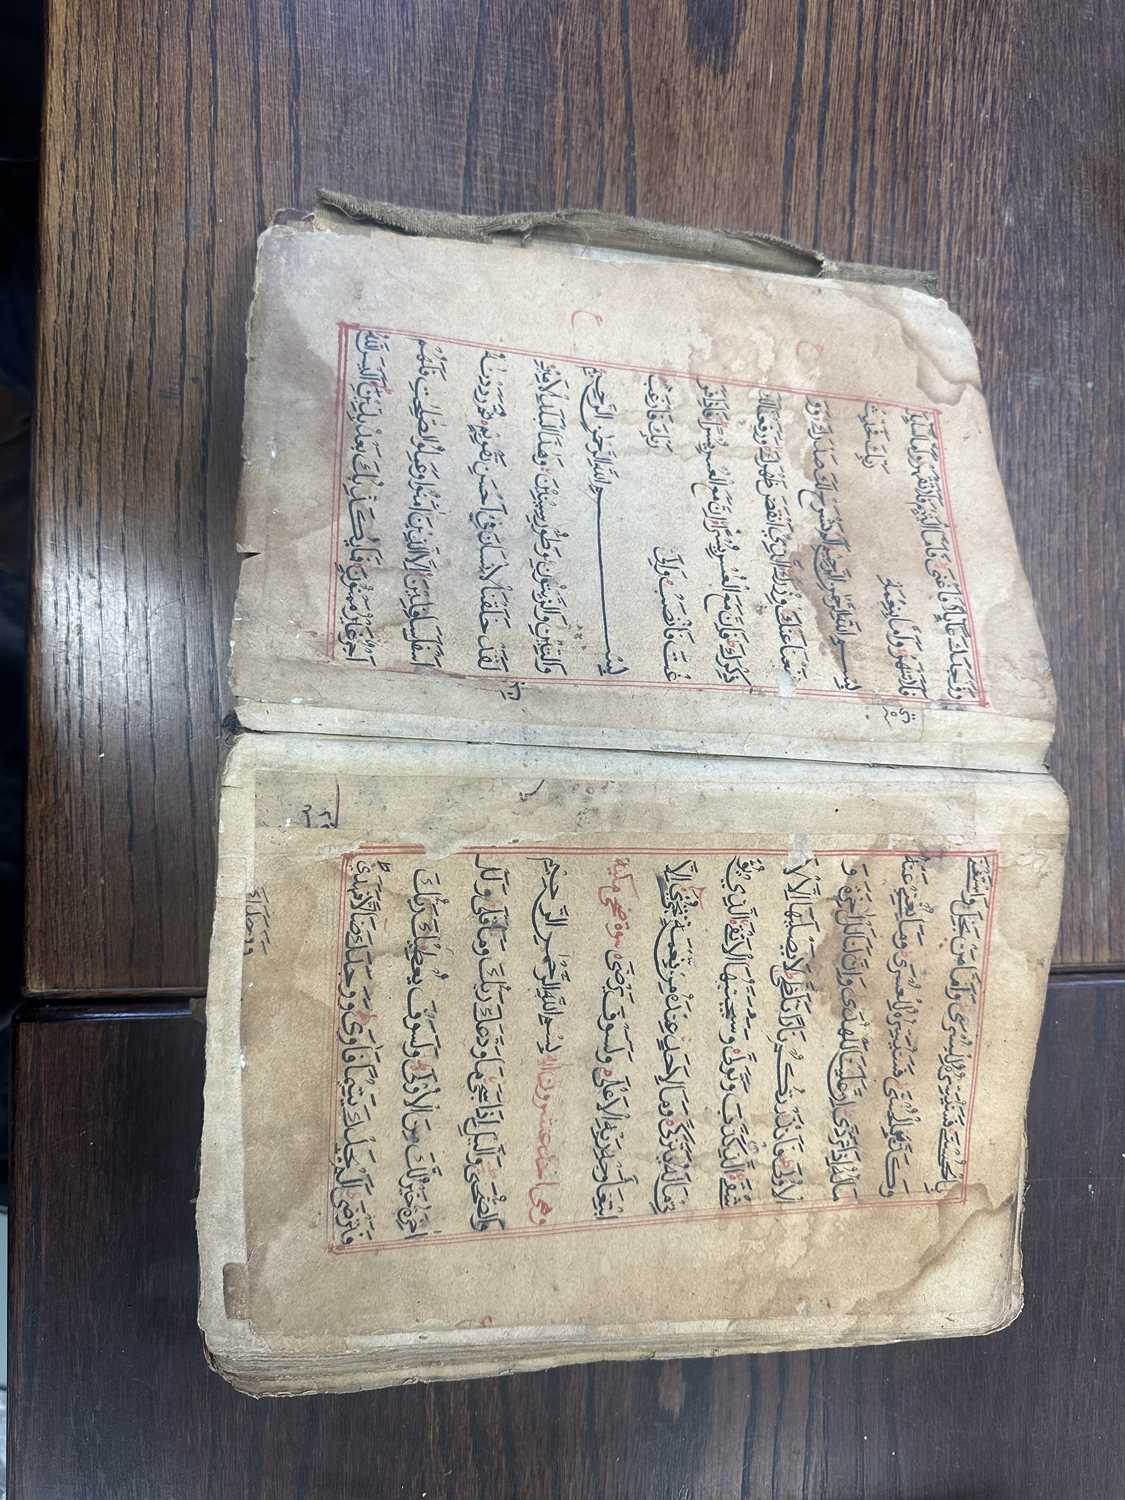 AN EARLY COPY OF THE KORAN LEATHER BOUND BOOK - Image 17 of 44